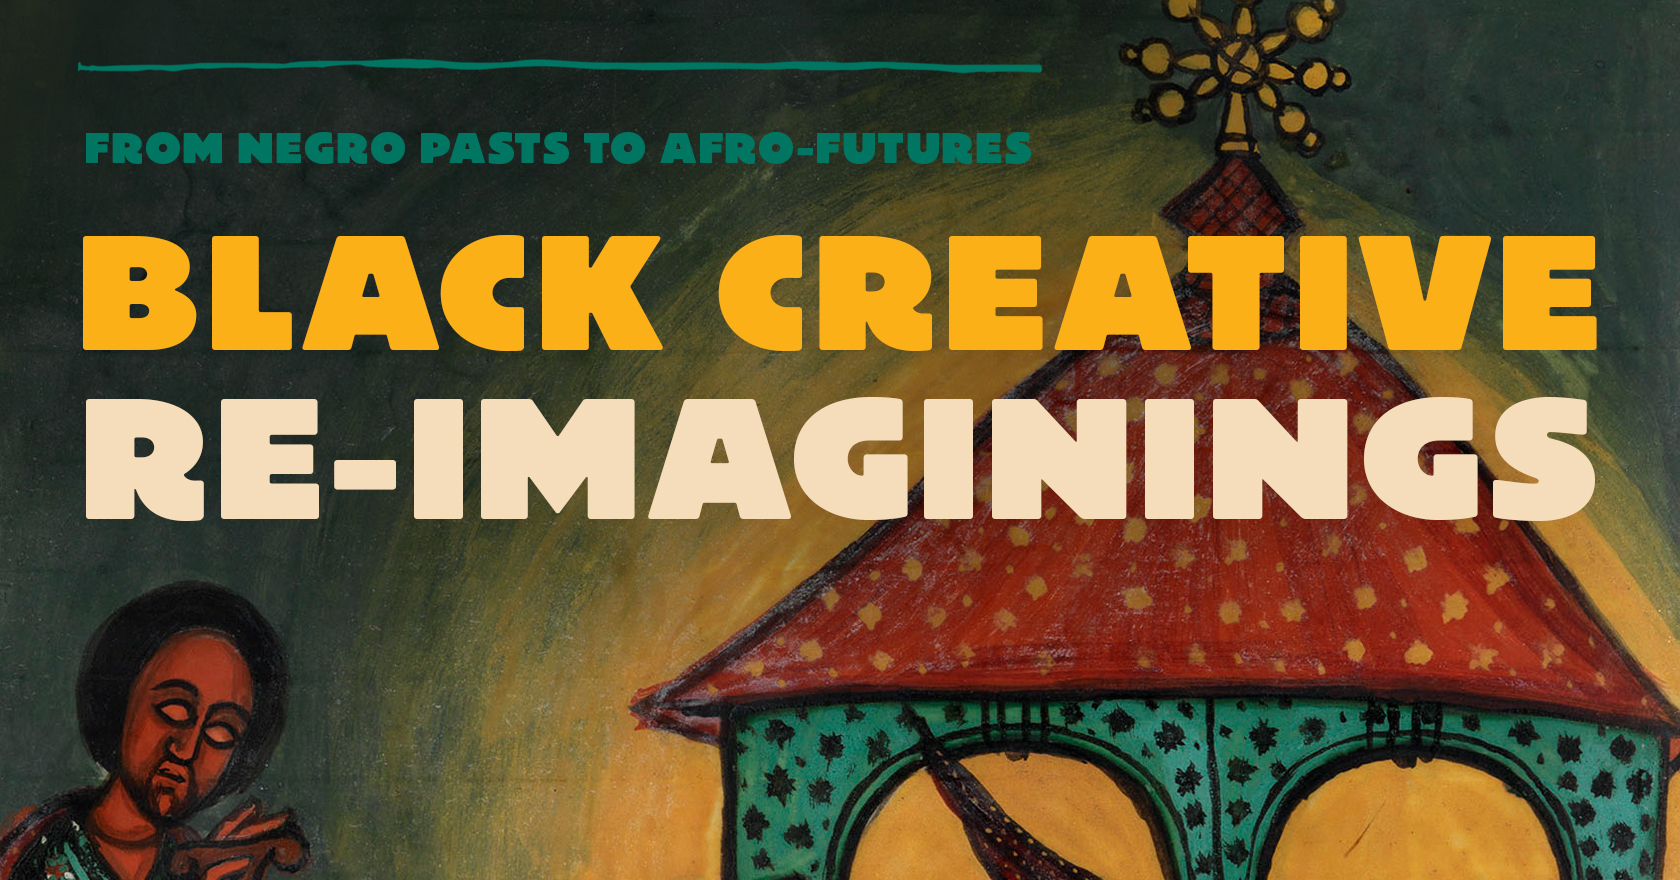 From Negro Pasts to Afro-Futures: Black Creative Re-imaginings. An online exhibition.